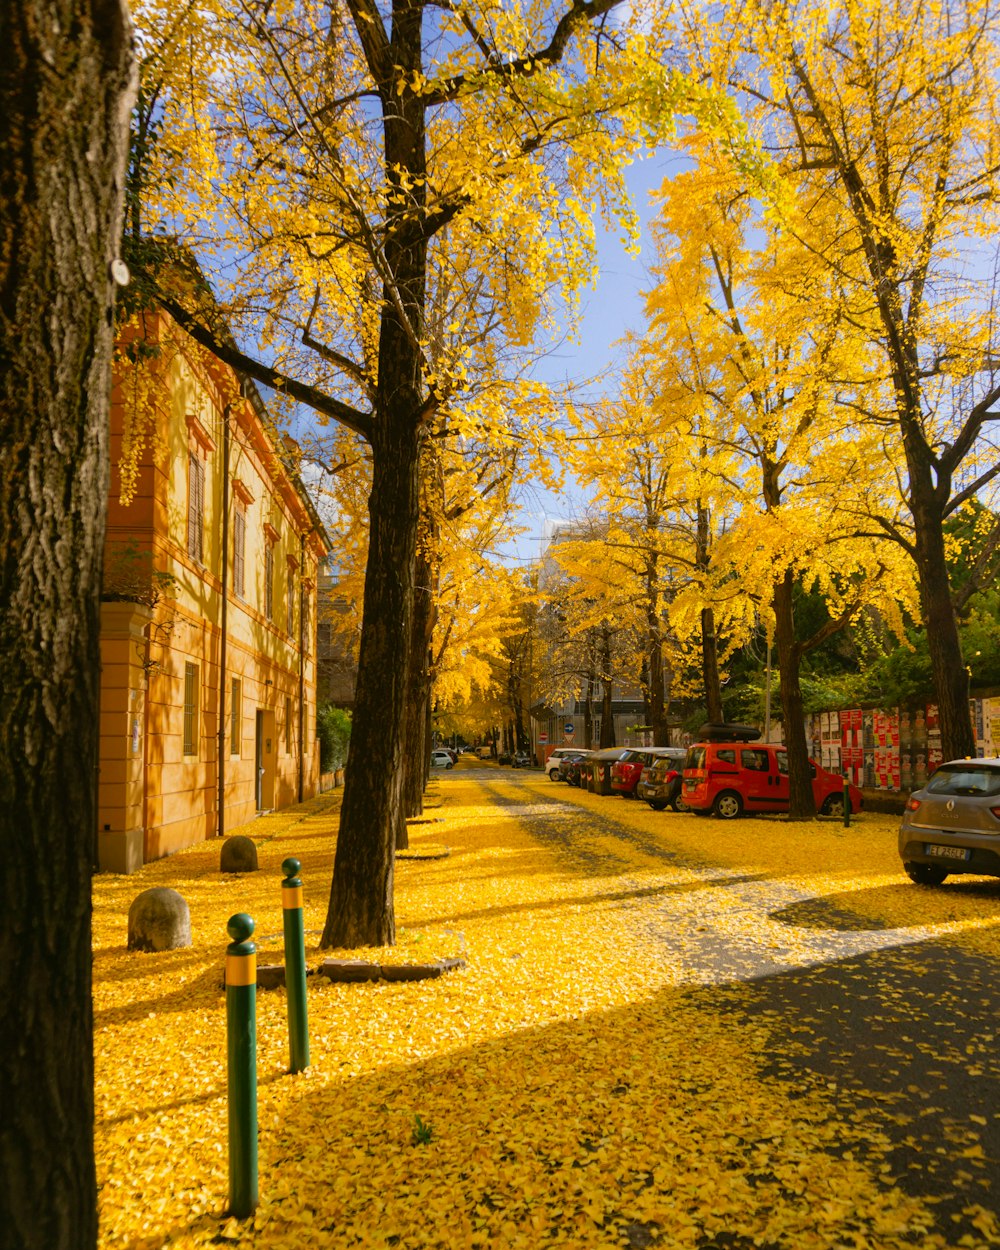 a city street with yellow leaves on the ground